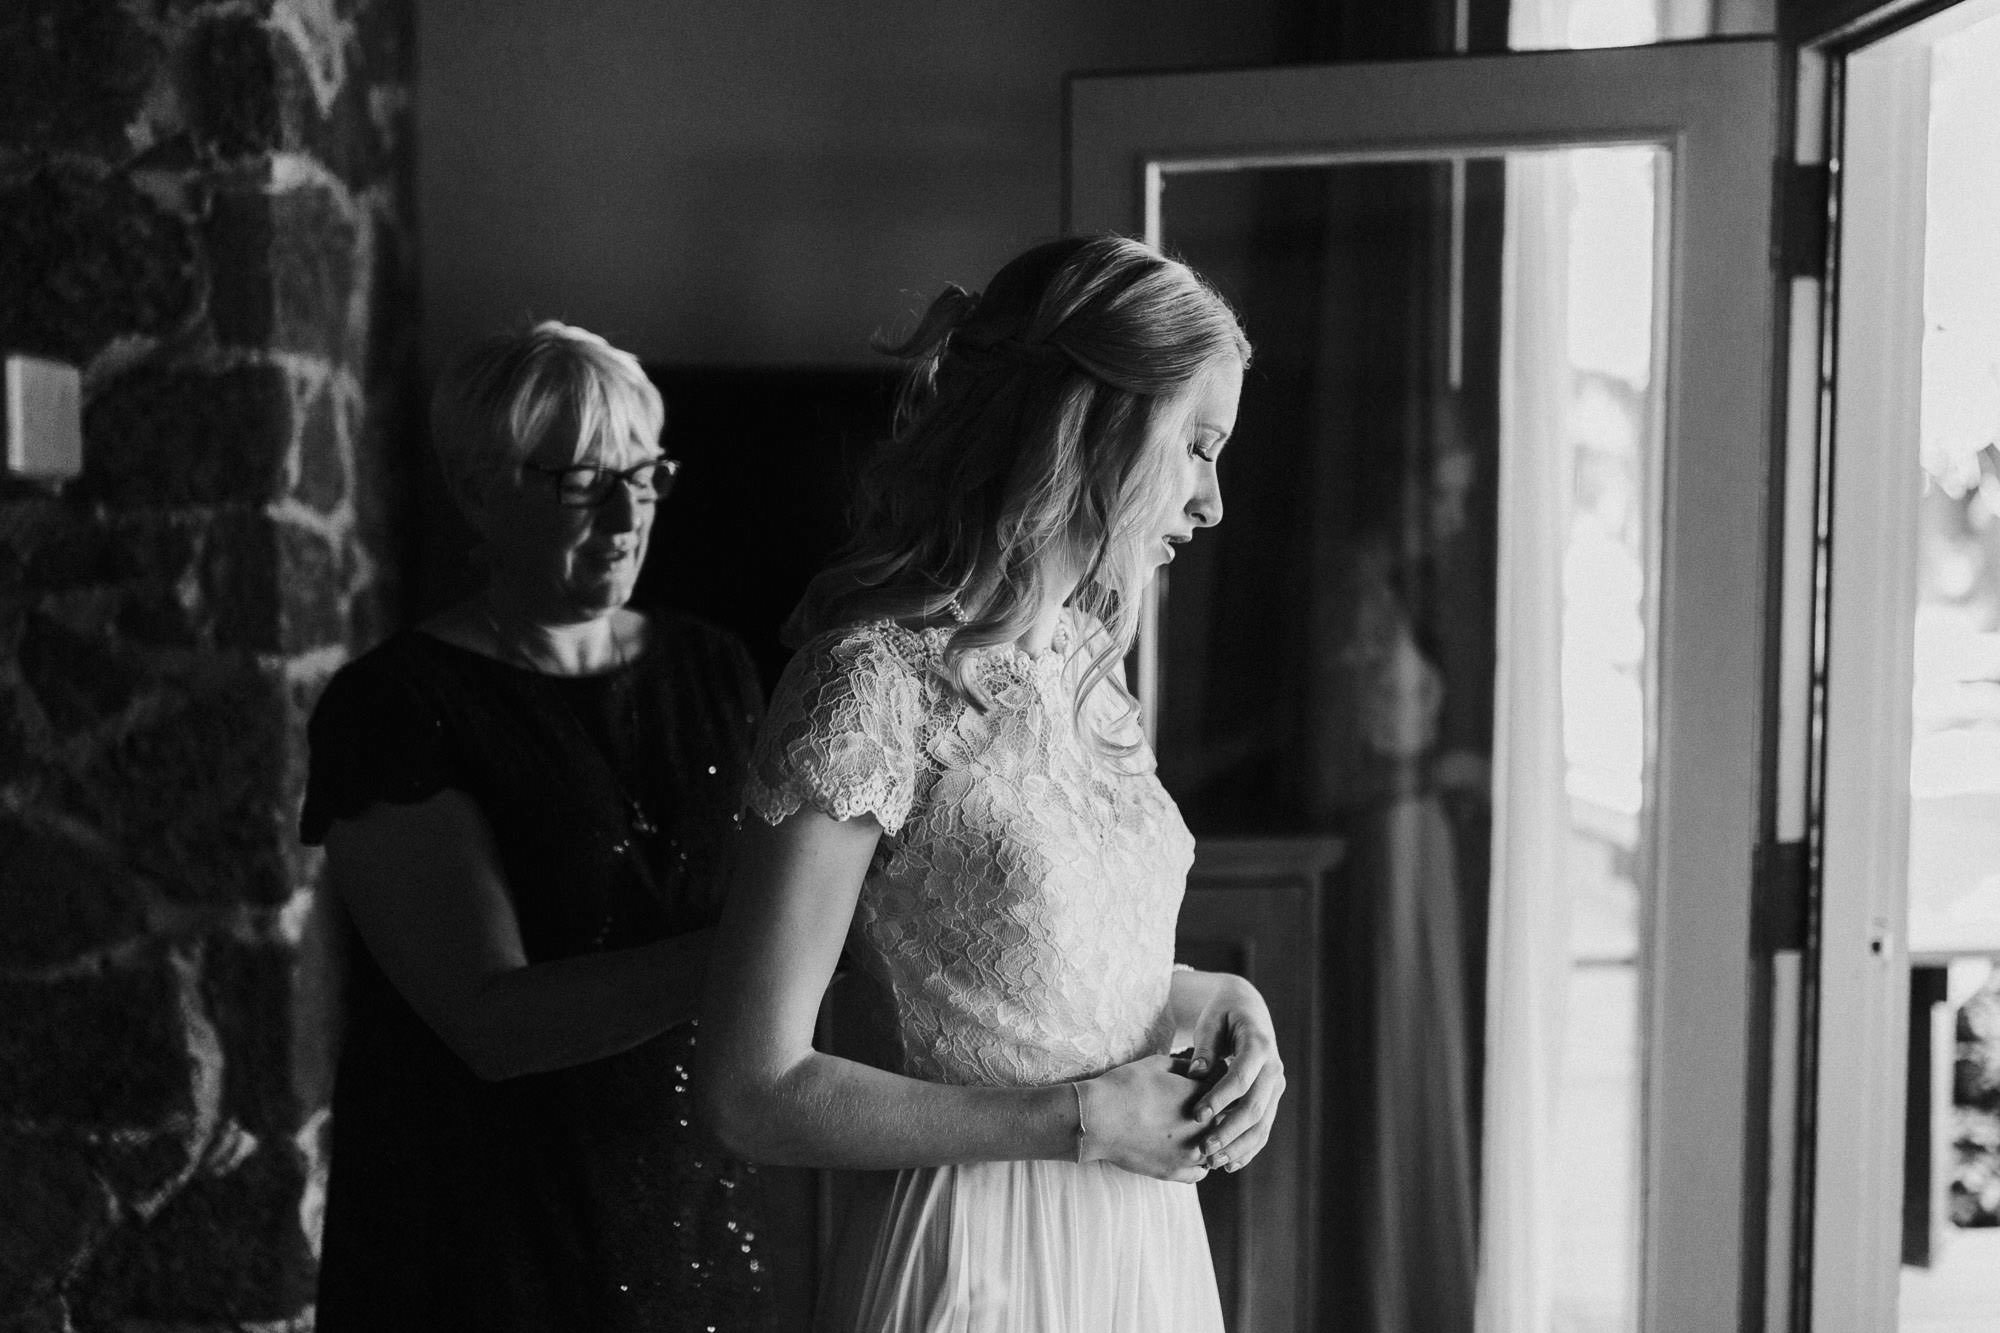 The bride's mother helps button up the bride's dress in Sunriver Oregon.